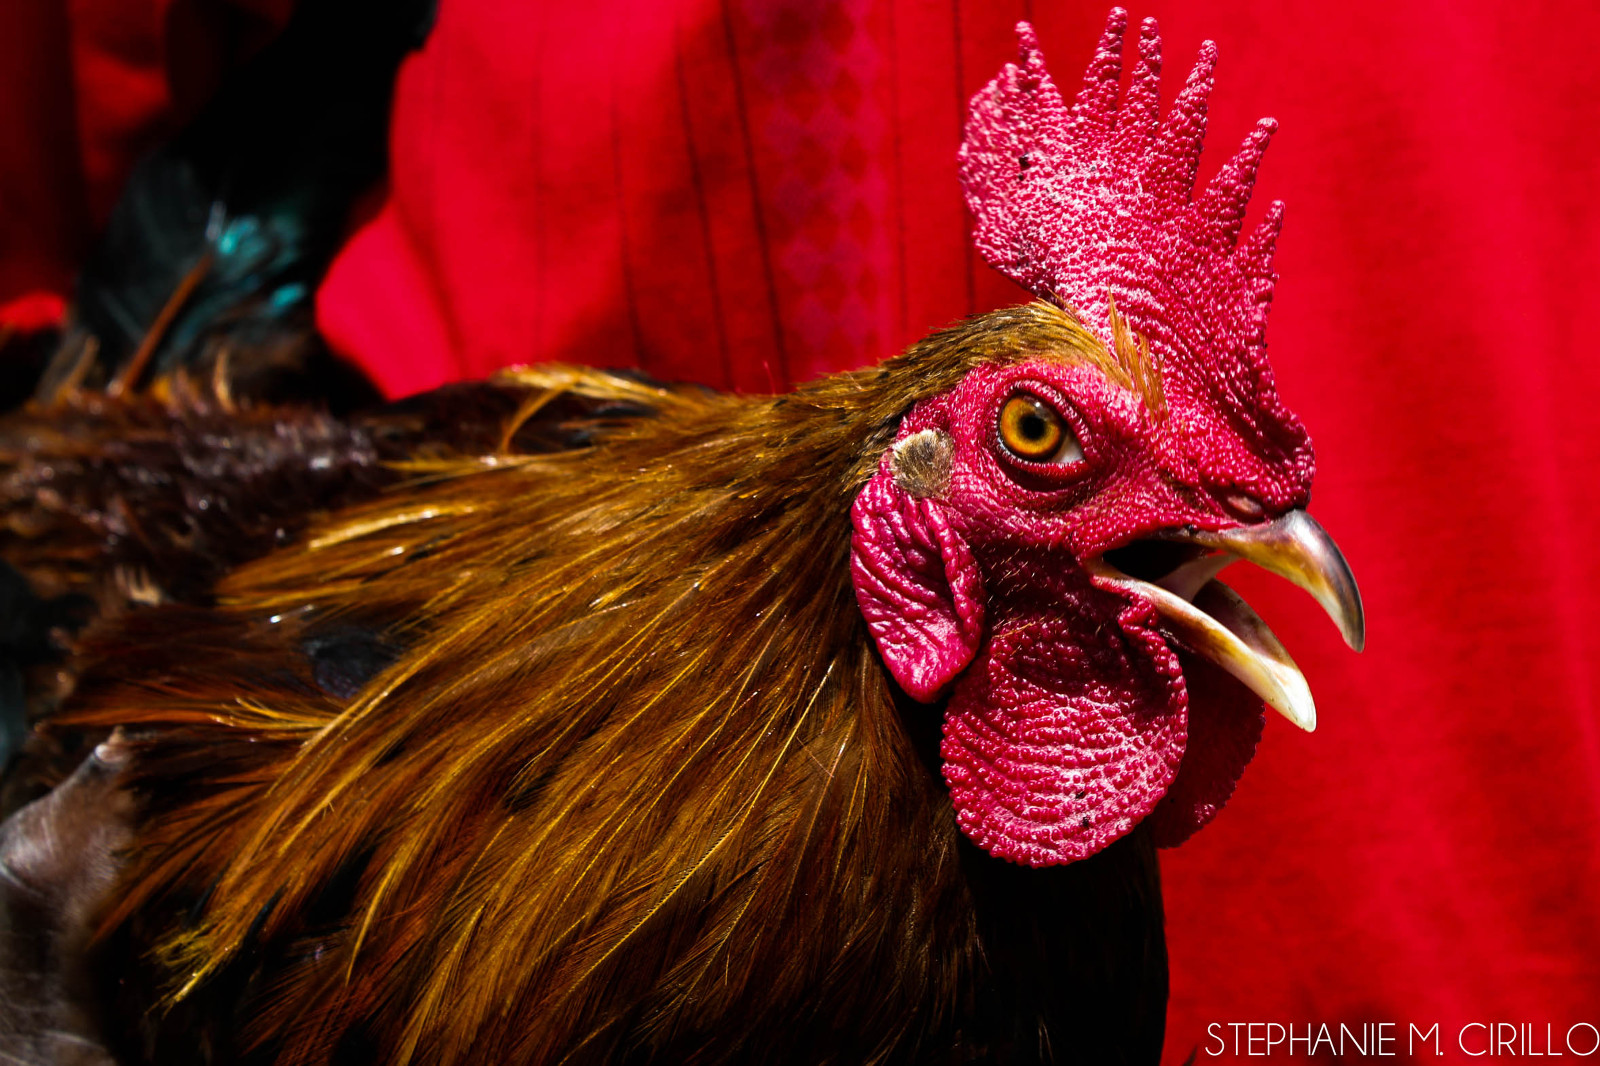 Much more effective than including the environment around the rooster. Look at the texture of its feathers and face!